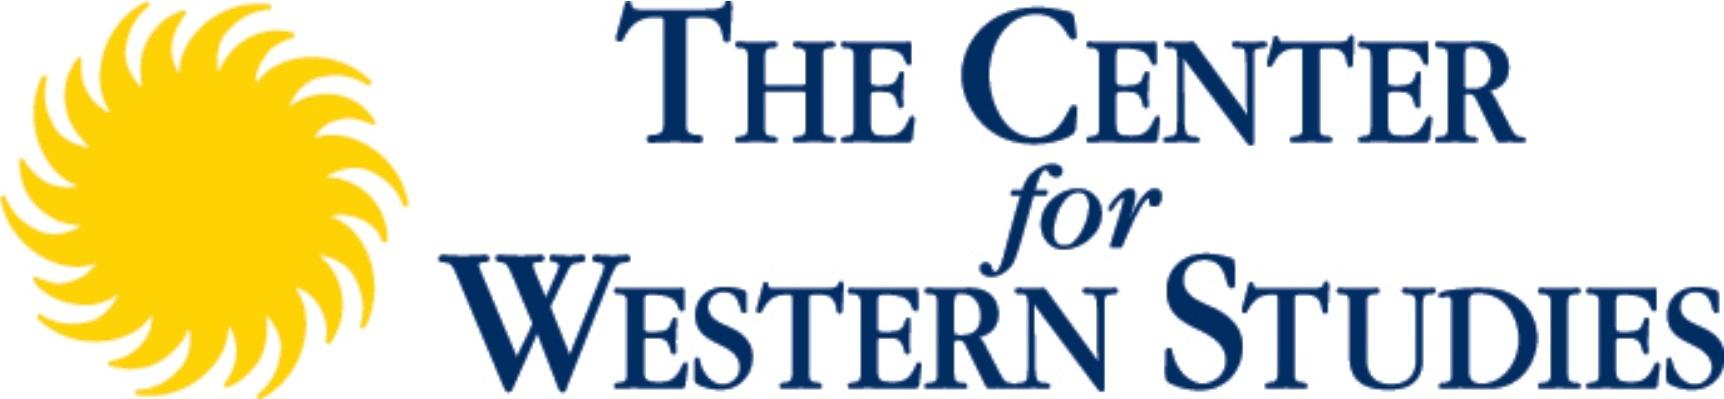 Augustana's Center for Western Studies supports Politics & Public Policy reporting